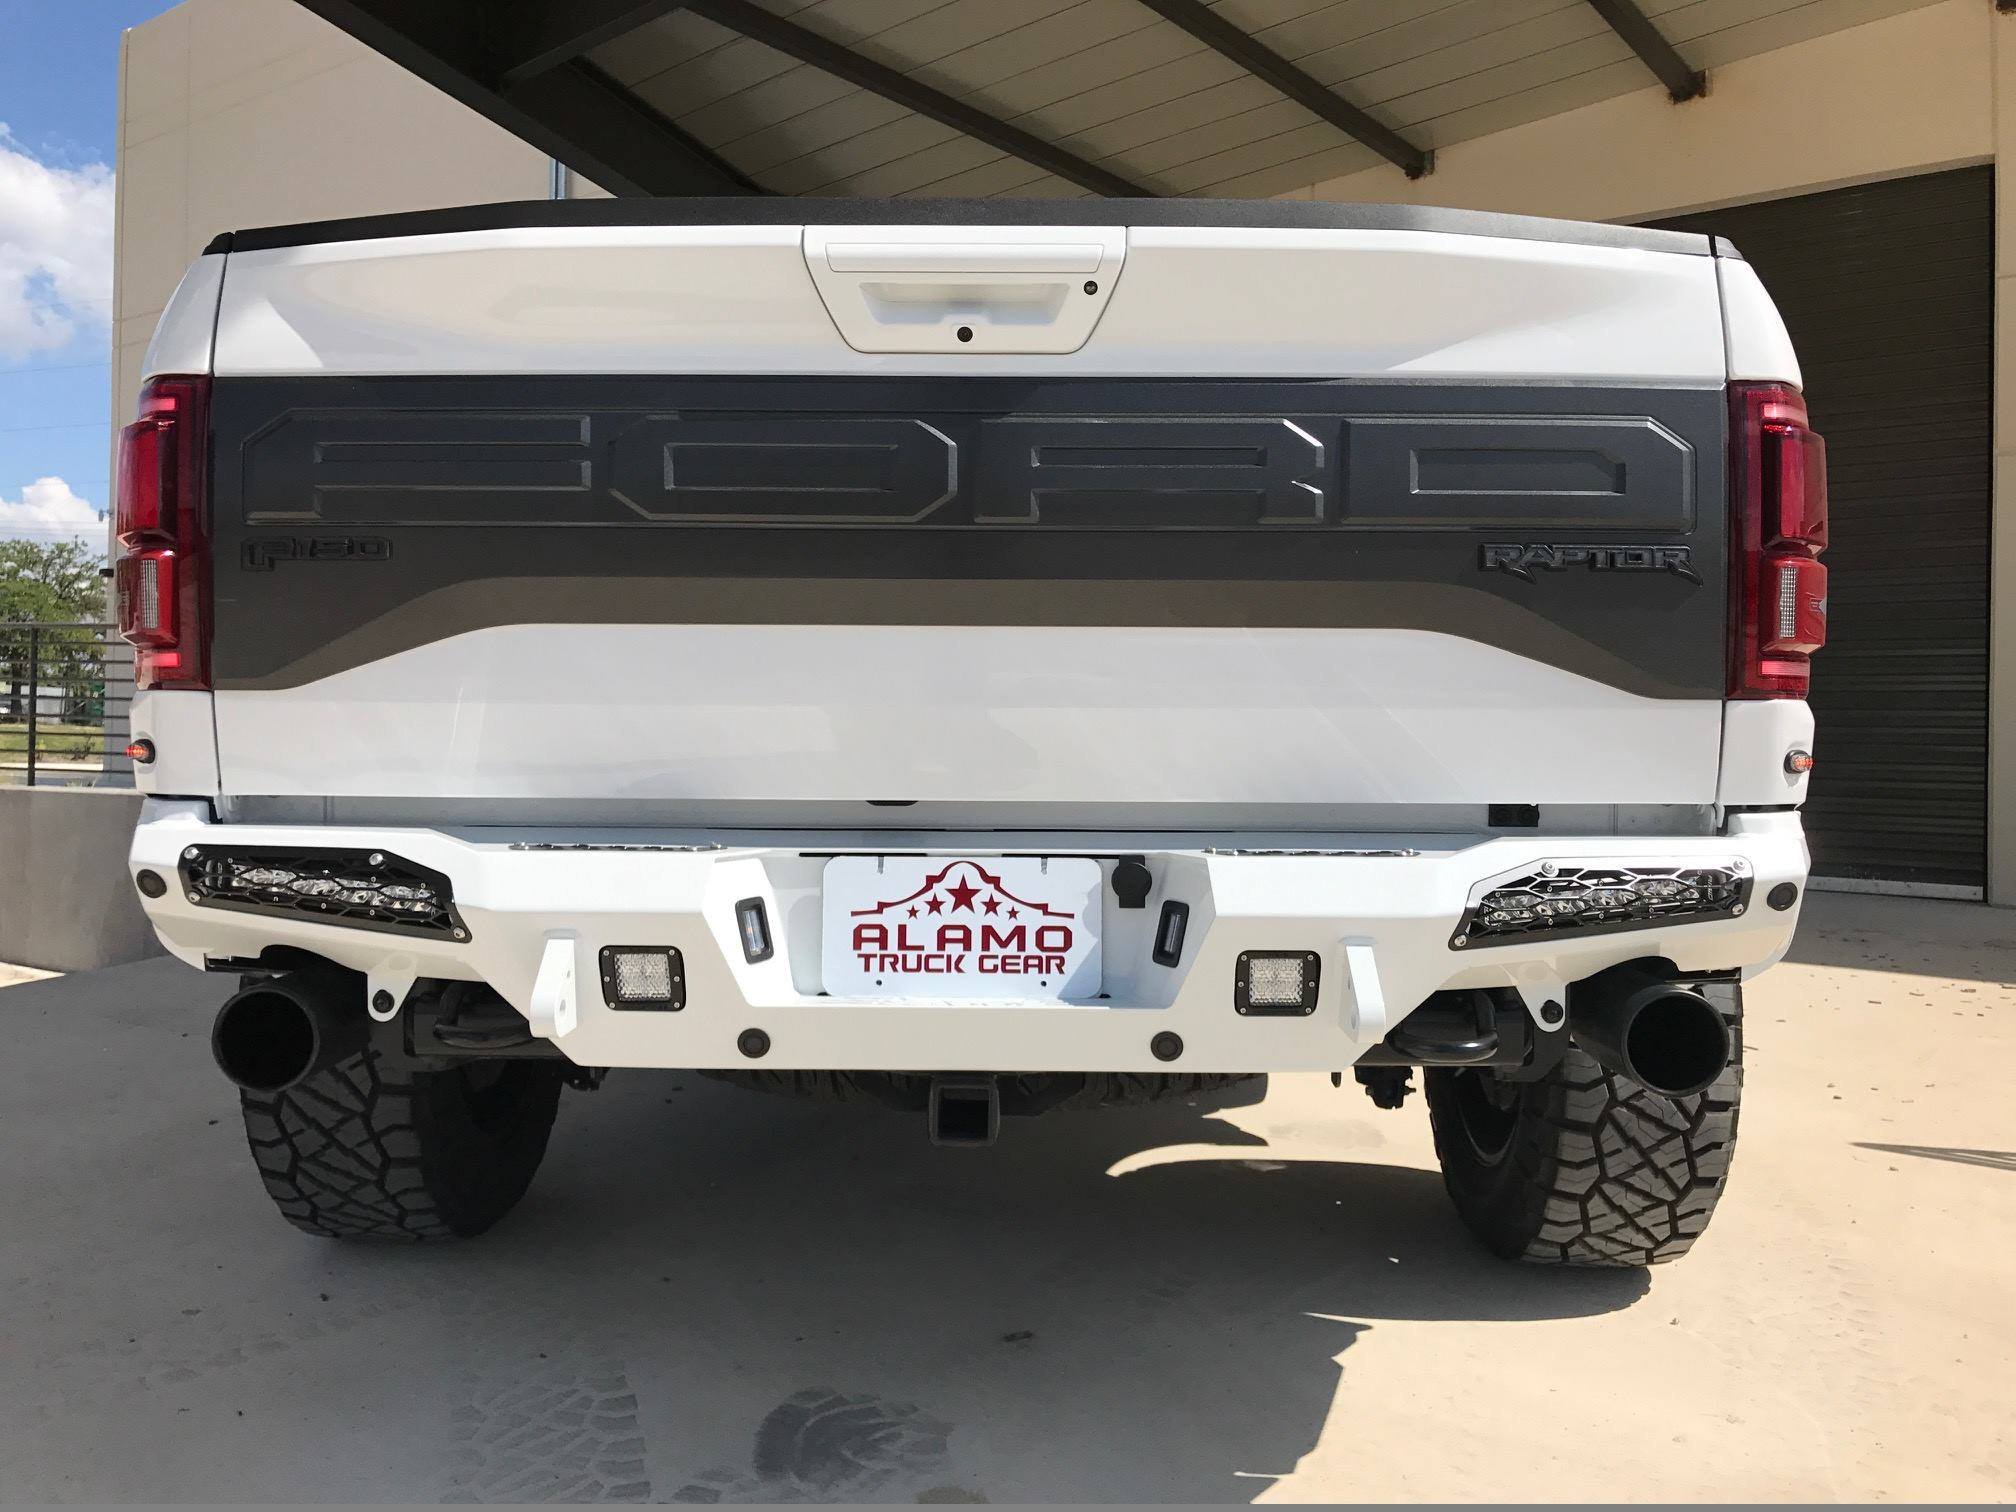 Off-Road Rear Bumper on White Lifted Ford F-150 - Photo by Addictive Desert Designs